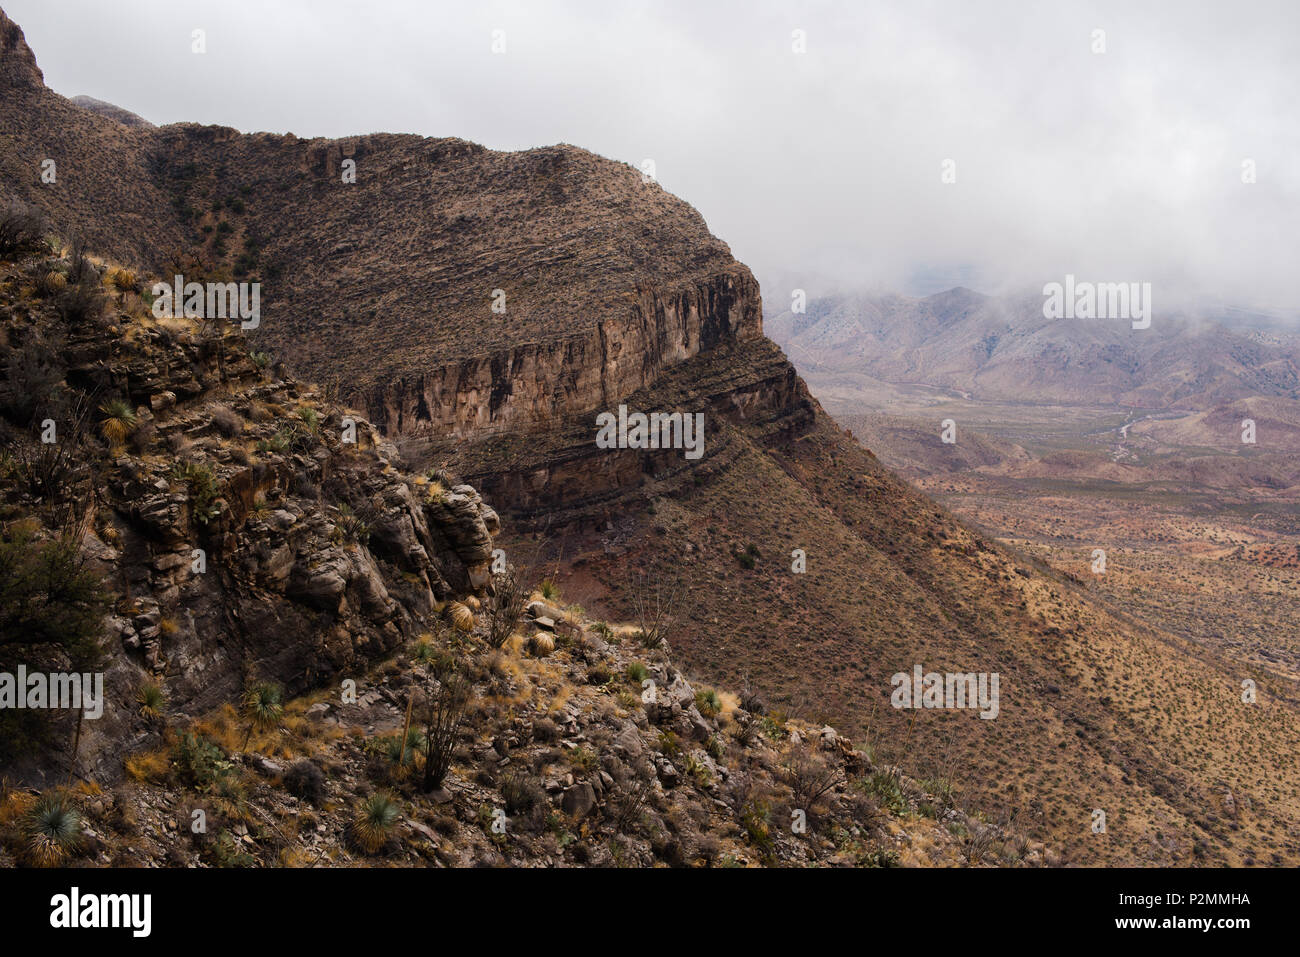 Scenic landscape view in the stormy desert mountains near Truth or Consequences, New Mexico. Stock Photo